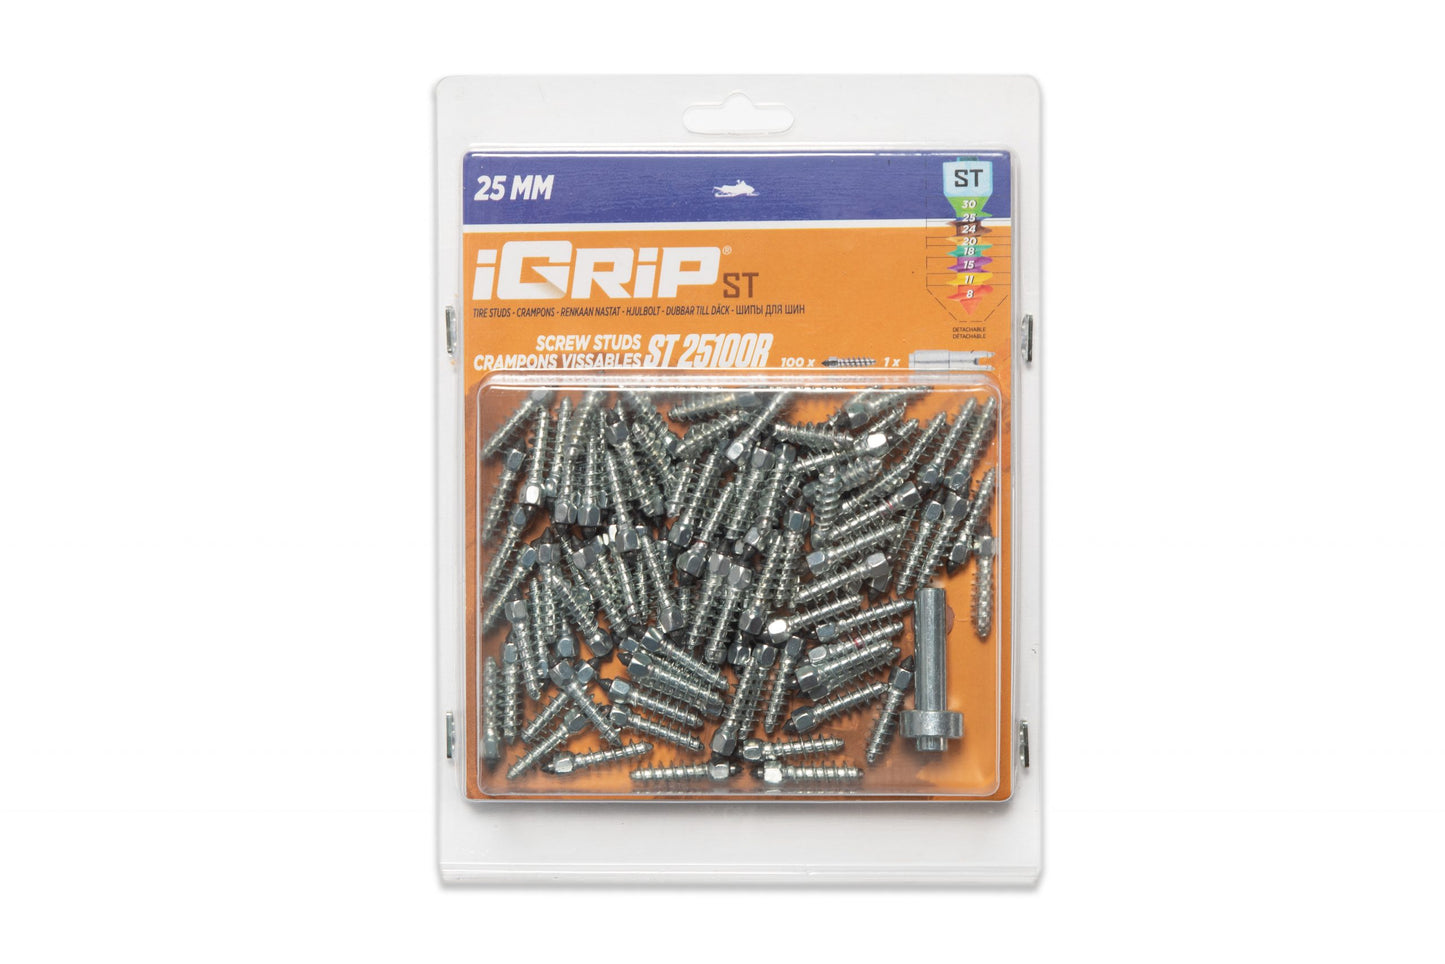 SS-28R iGrip Shouldered Racing Tire Studs